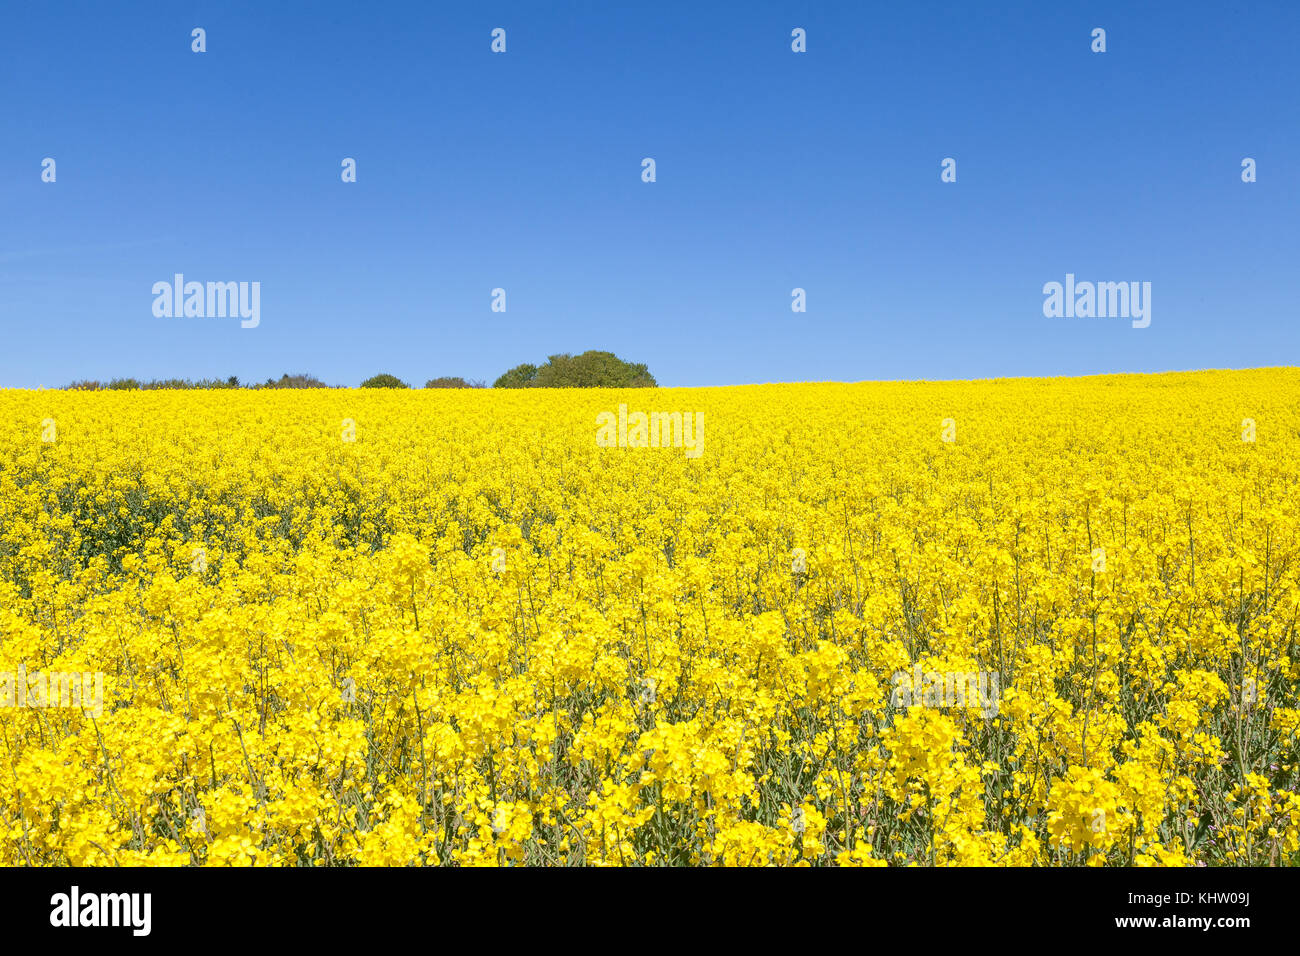 Bright yellow rapeseed, canola, rapaseed, colza or Brassica napus flowering in a farm field during early spring cultivated for its oil rich seeds Stock Photo